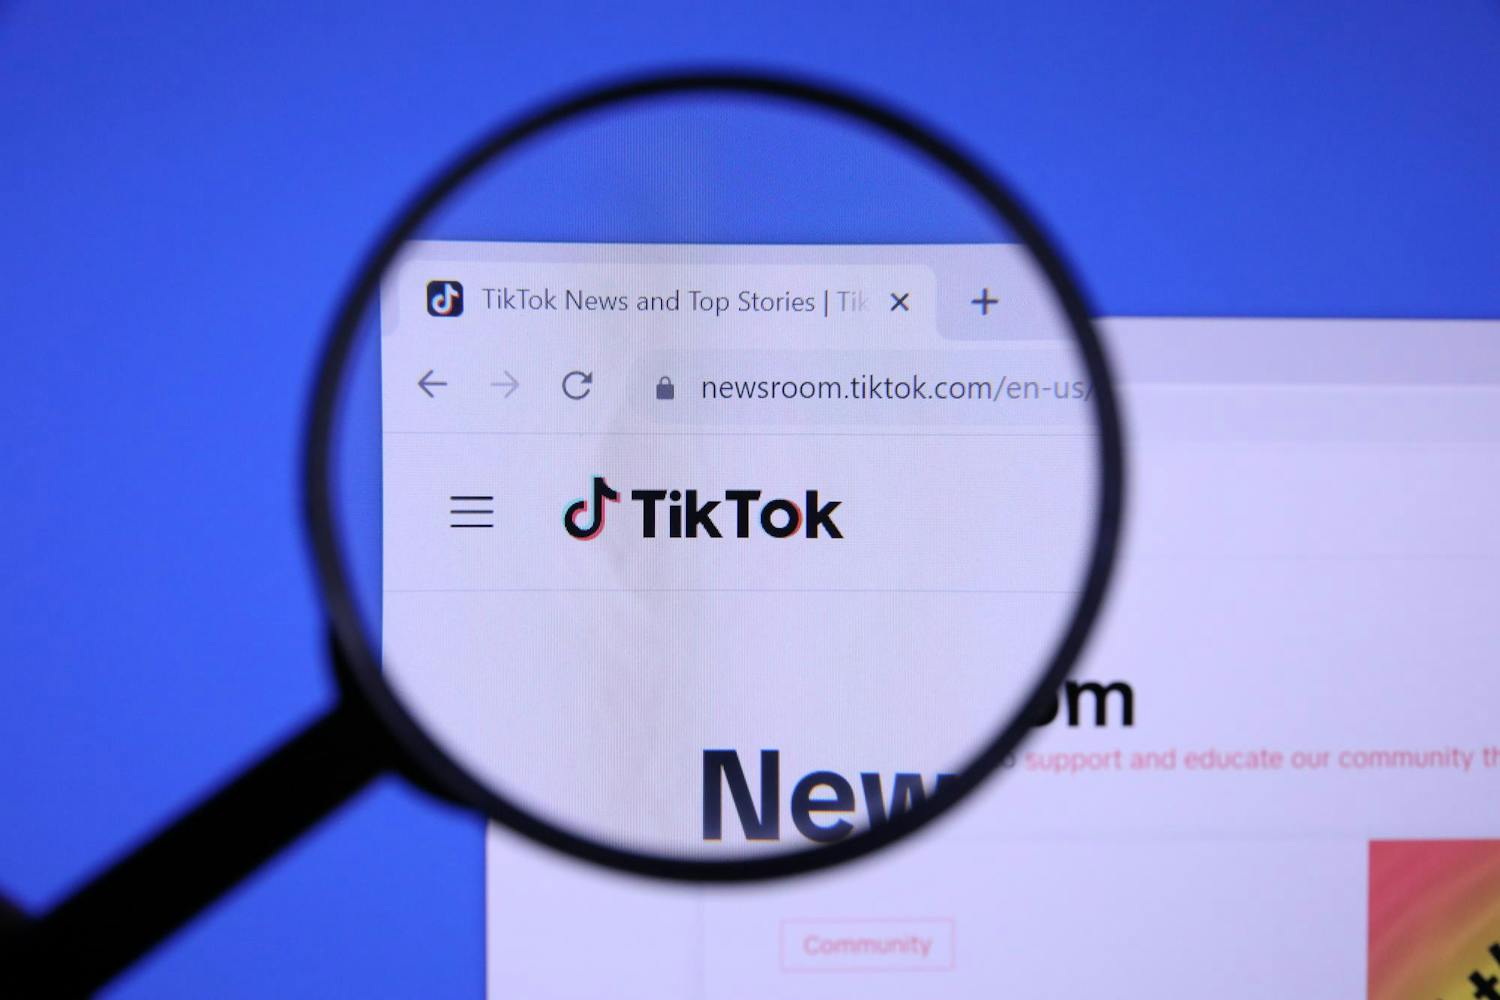 Homepage of TIKTOK Website magnified on logo with magnifying glass